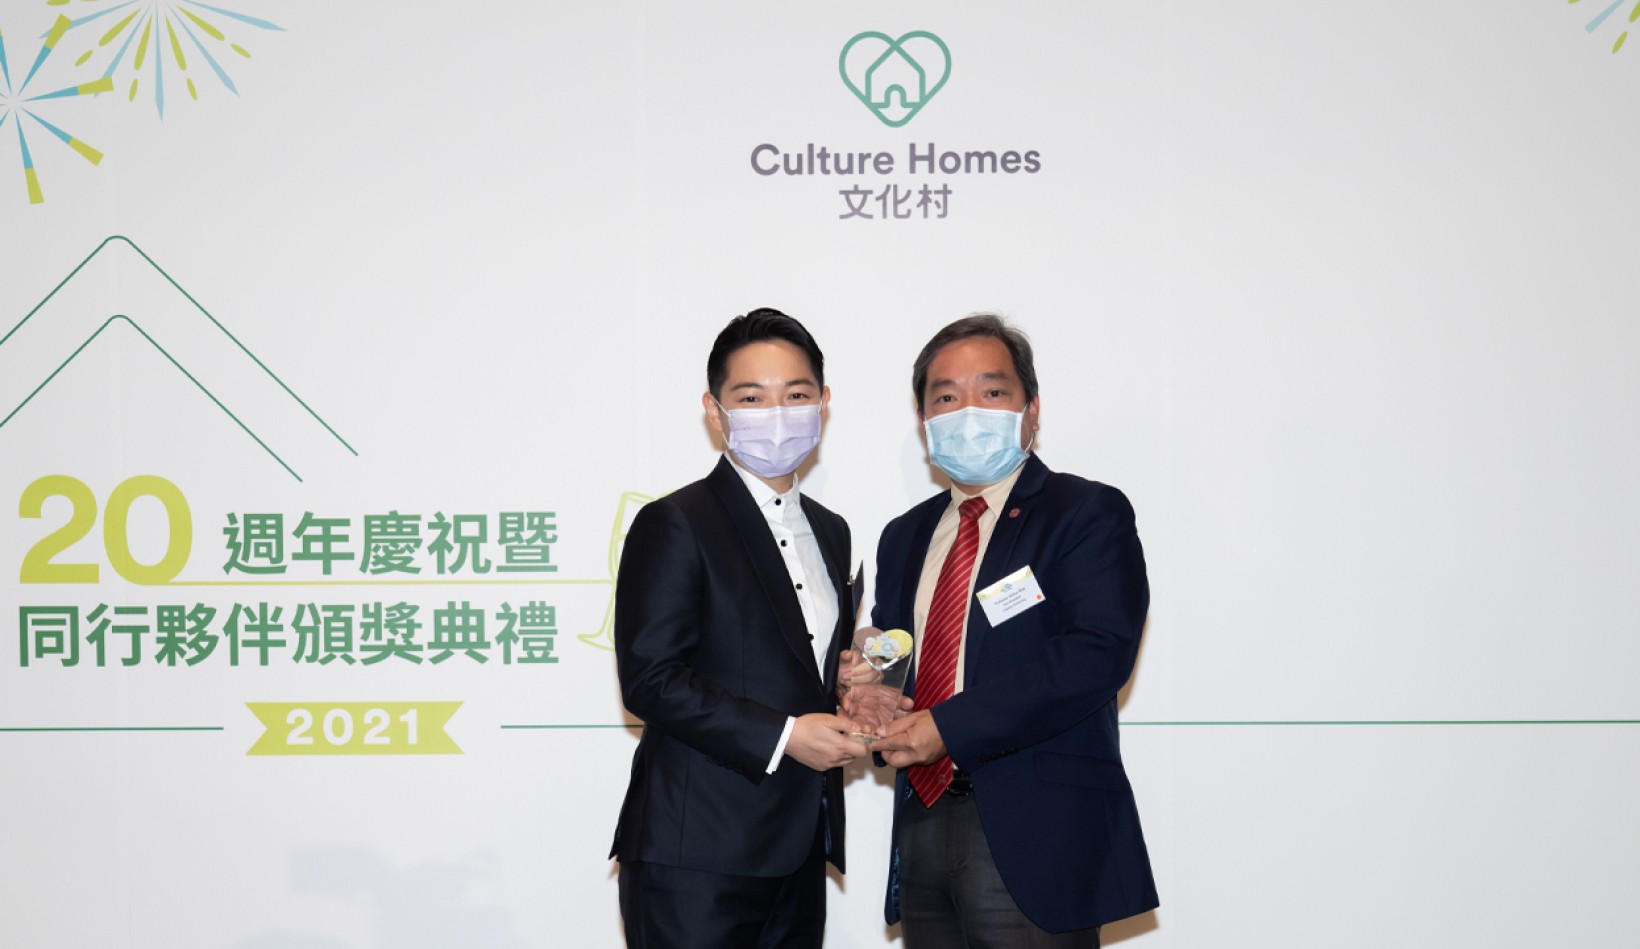 Lingnan University received the Partnership Award from Culture Homes